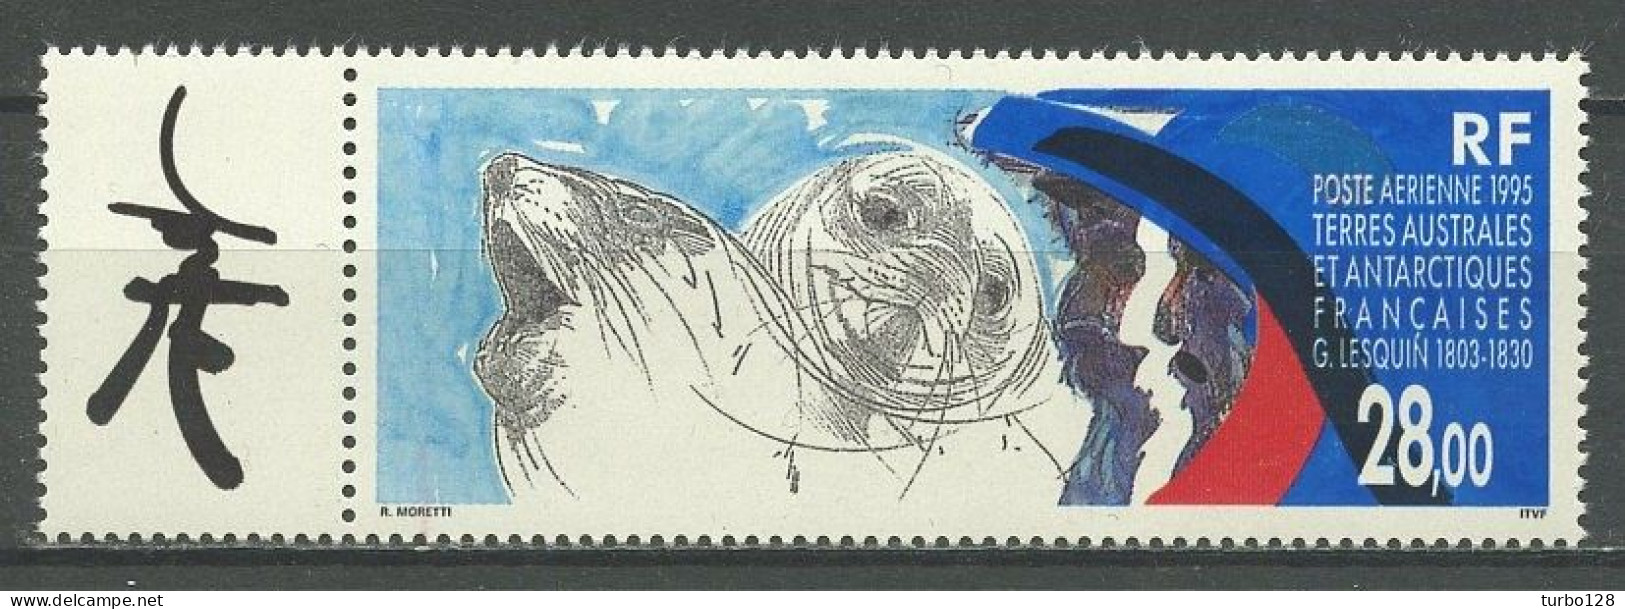 TAAF 1995 PA N° 136 ** Neuf MNH Superbe C 14,20 € Faune Animaux Animals - G. Lesquin Phoques - Luchtpost